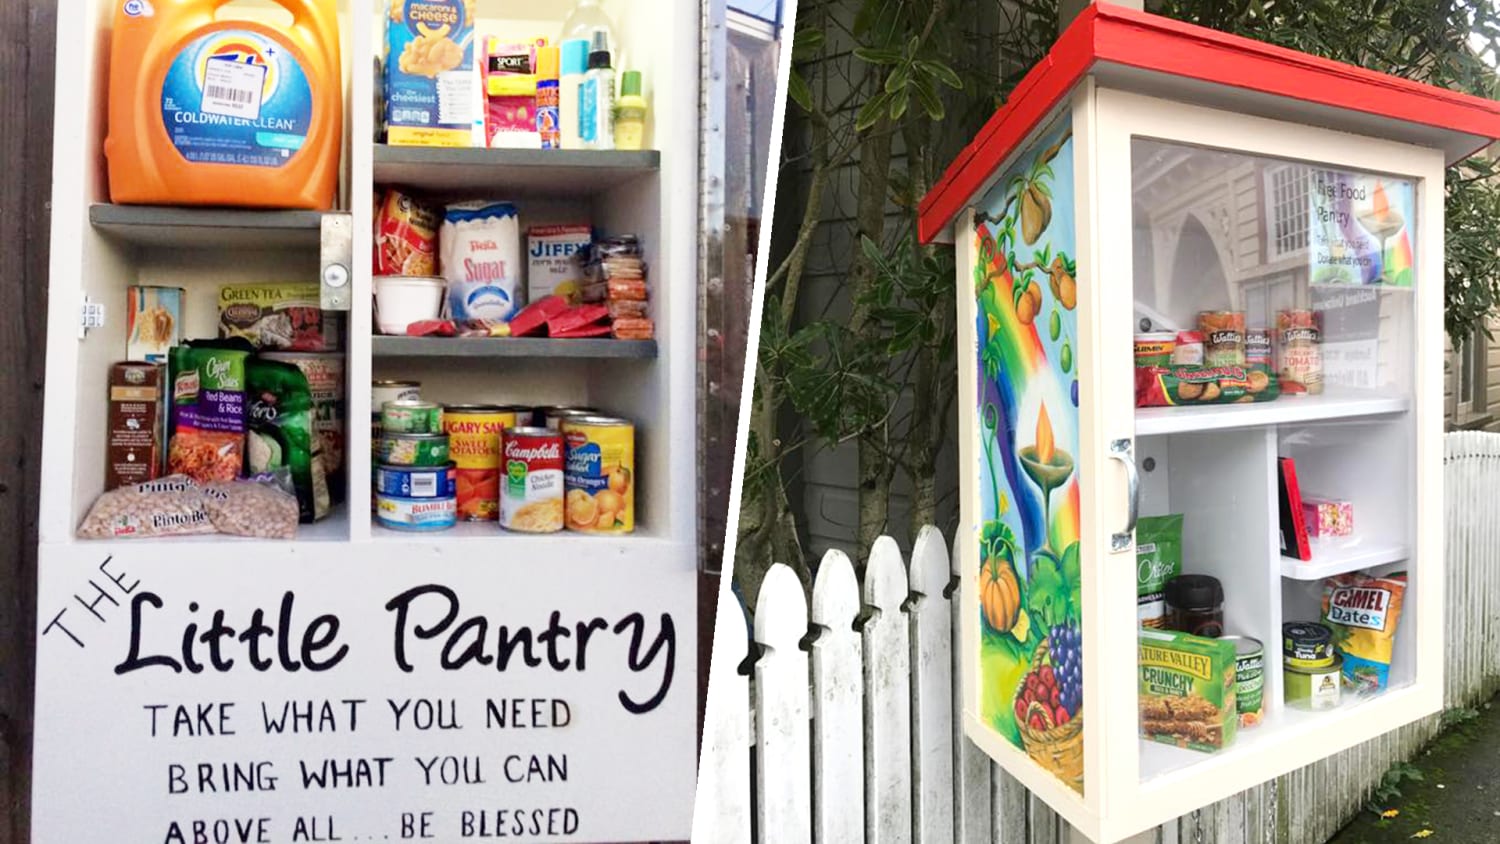 slideshow-little-free-pantries-today-170809-tease_45aa548a64214be7a126911df0435875.jpg